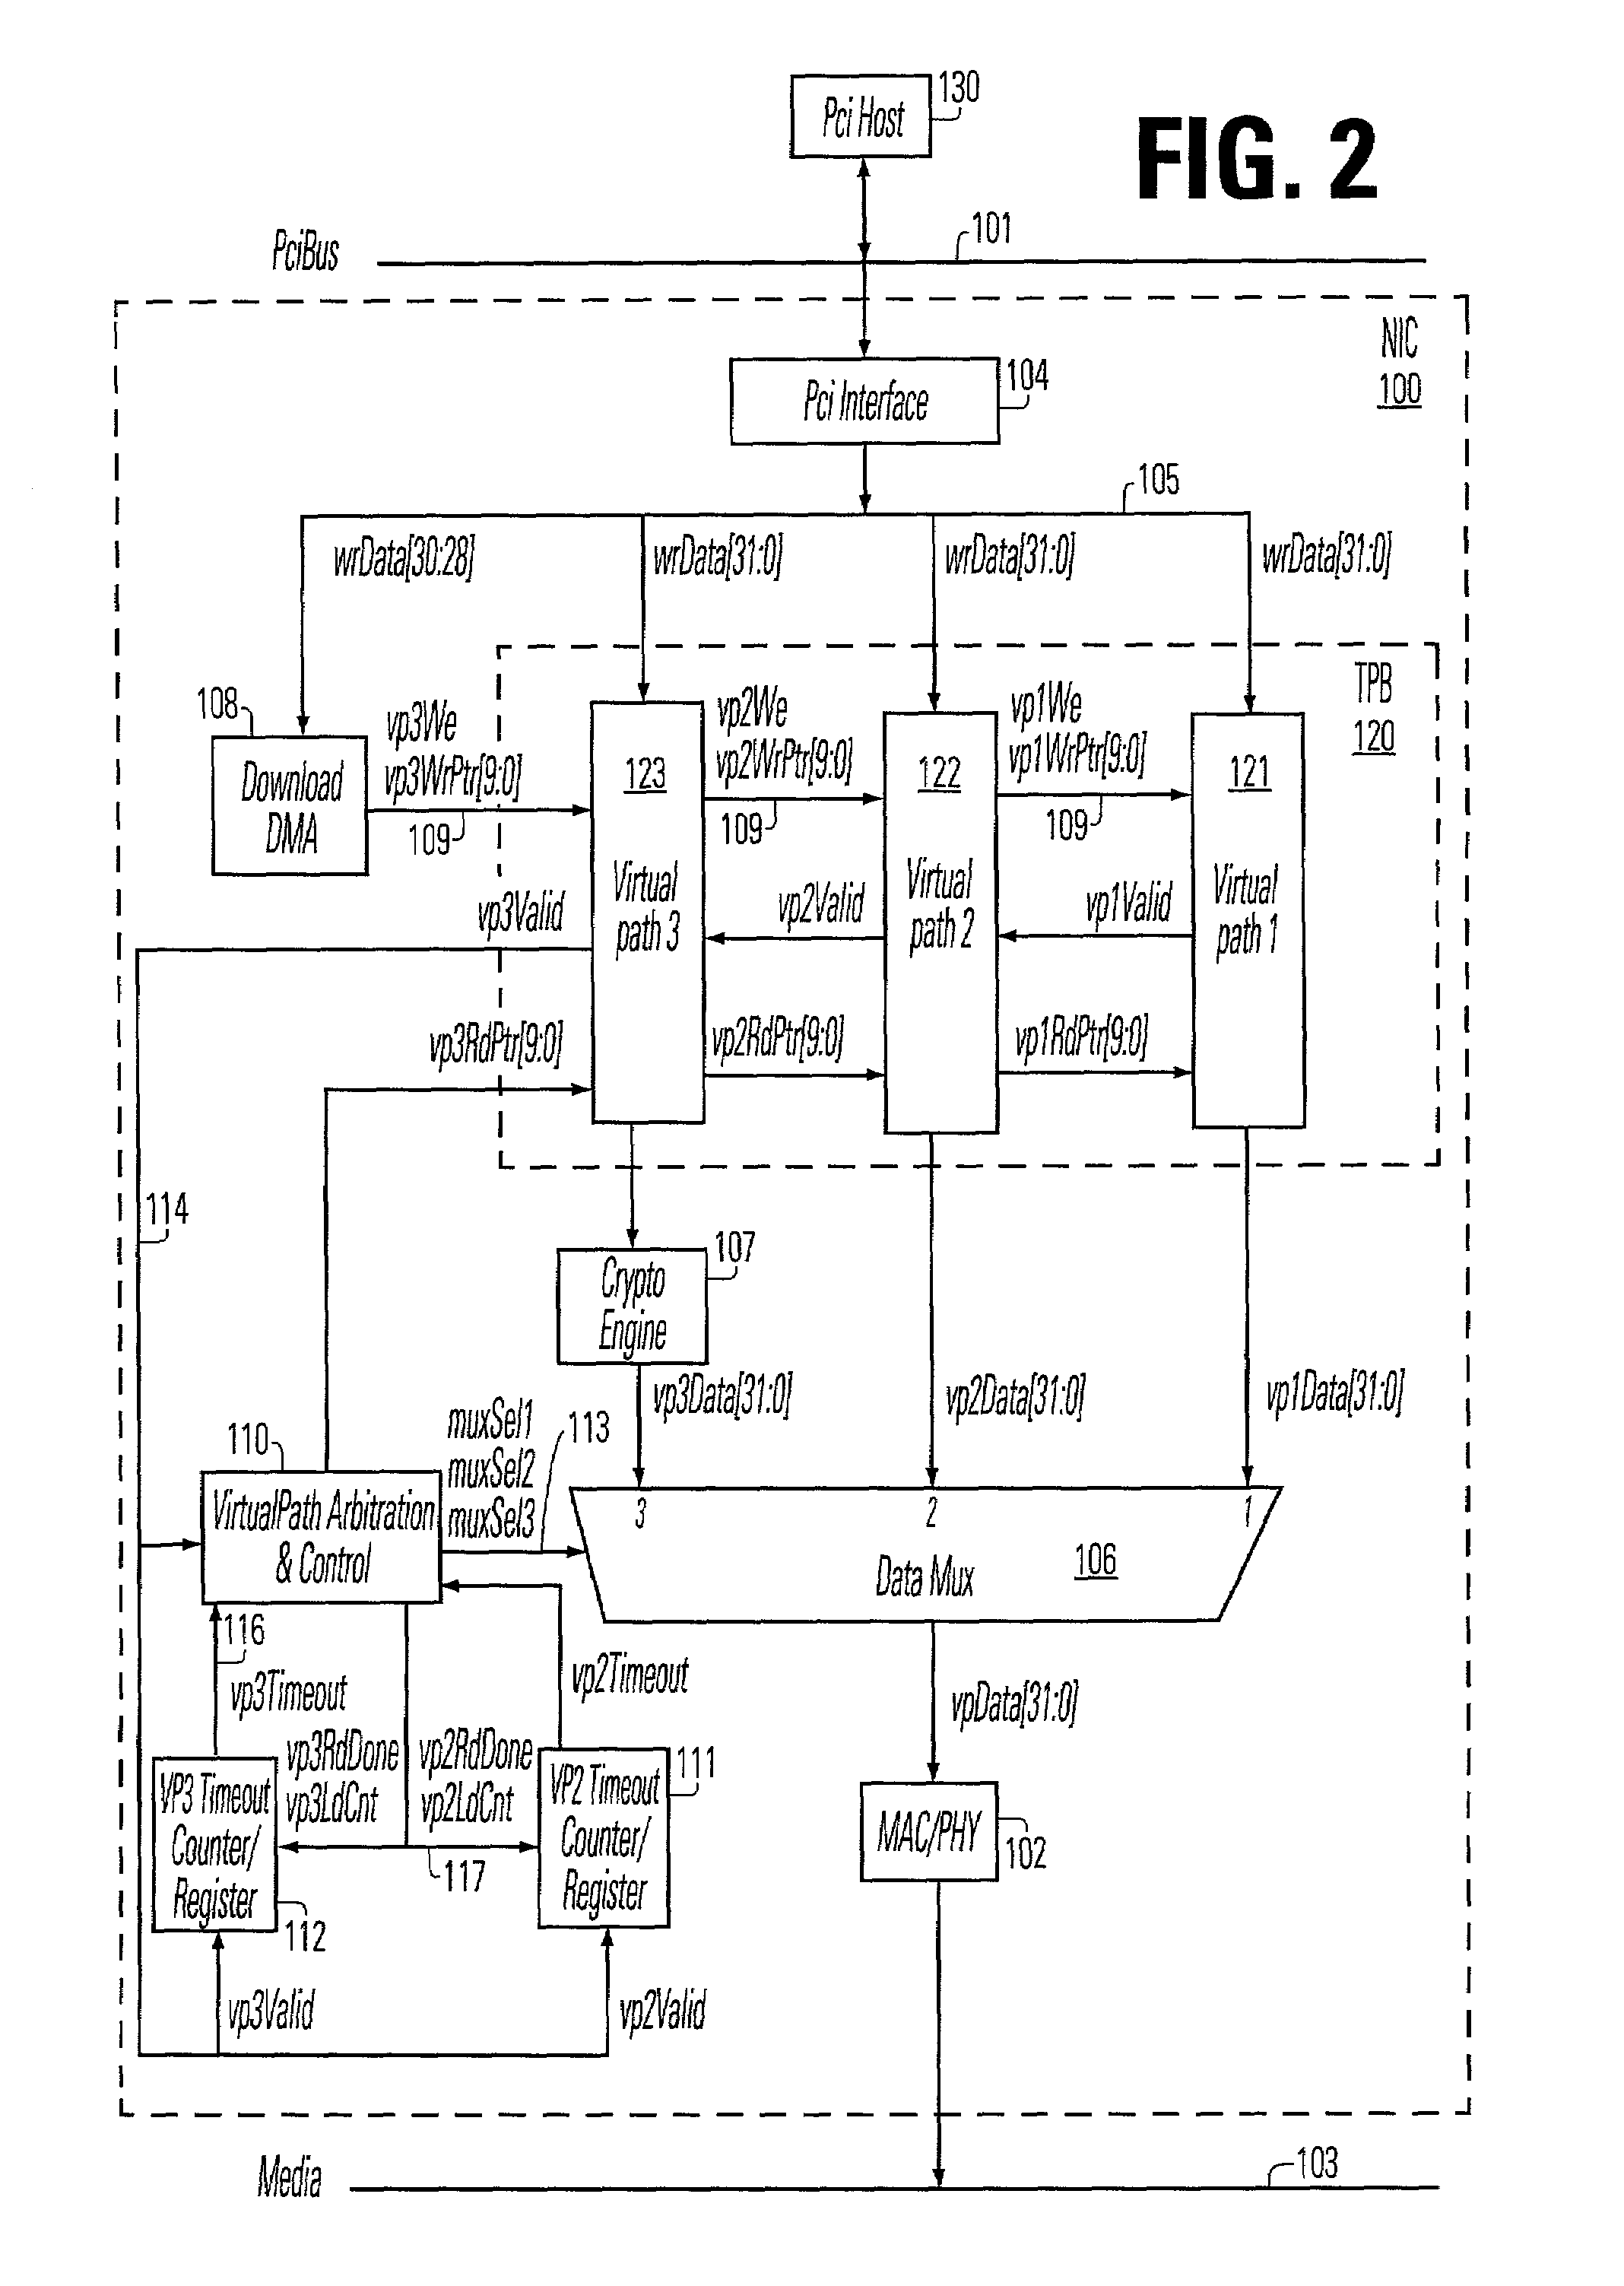 Network interface supporting virtual paths for quality of service